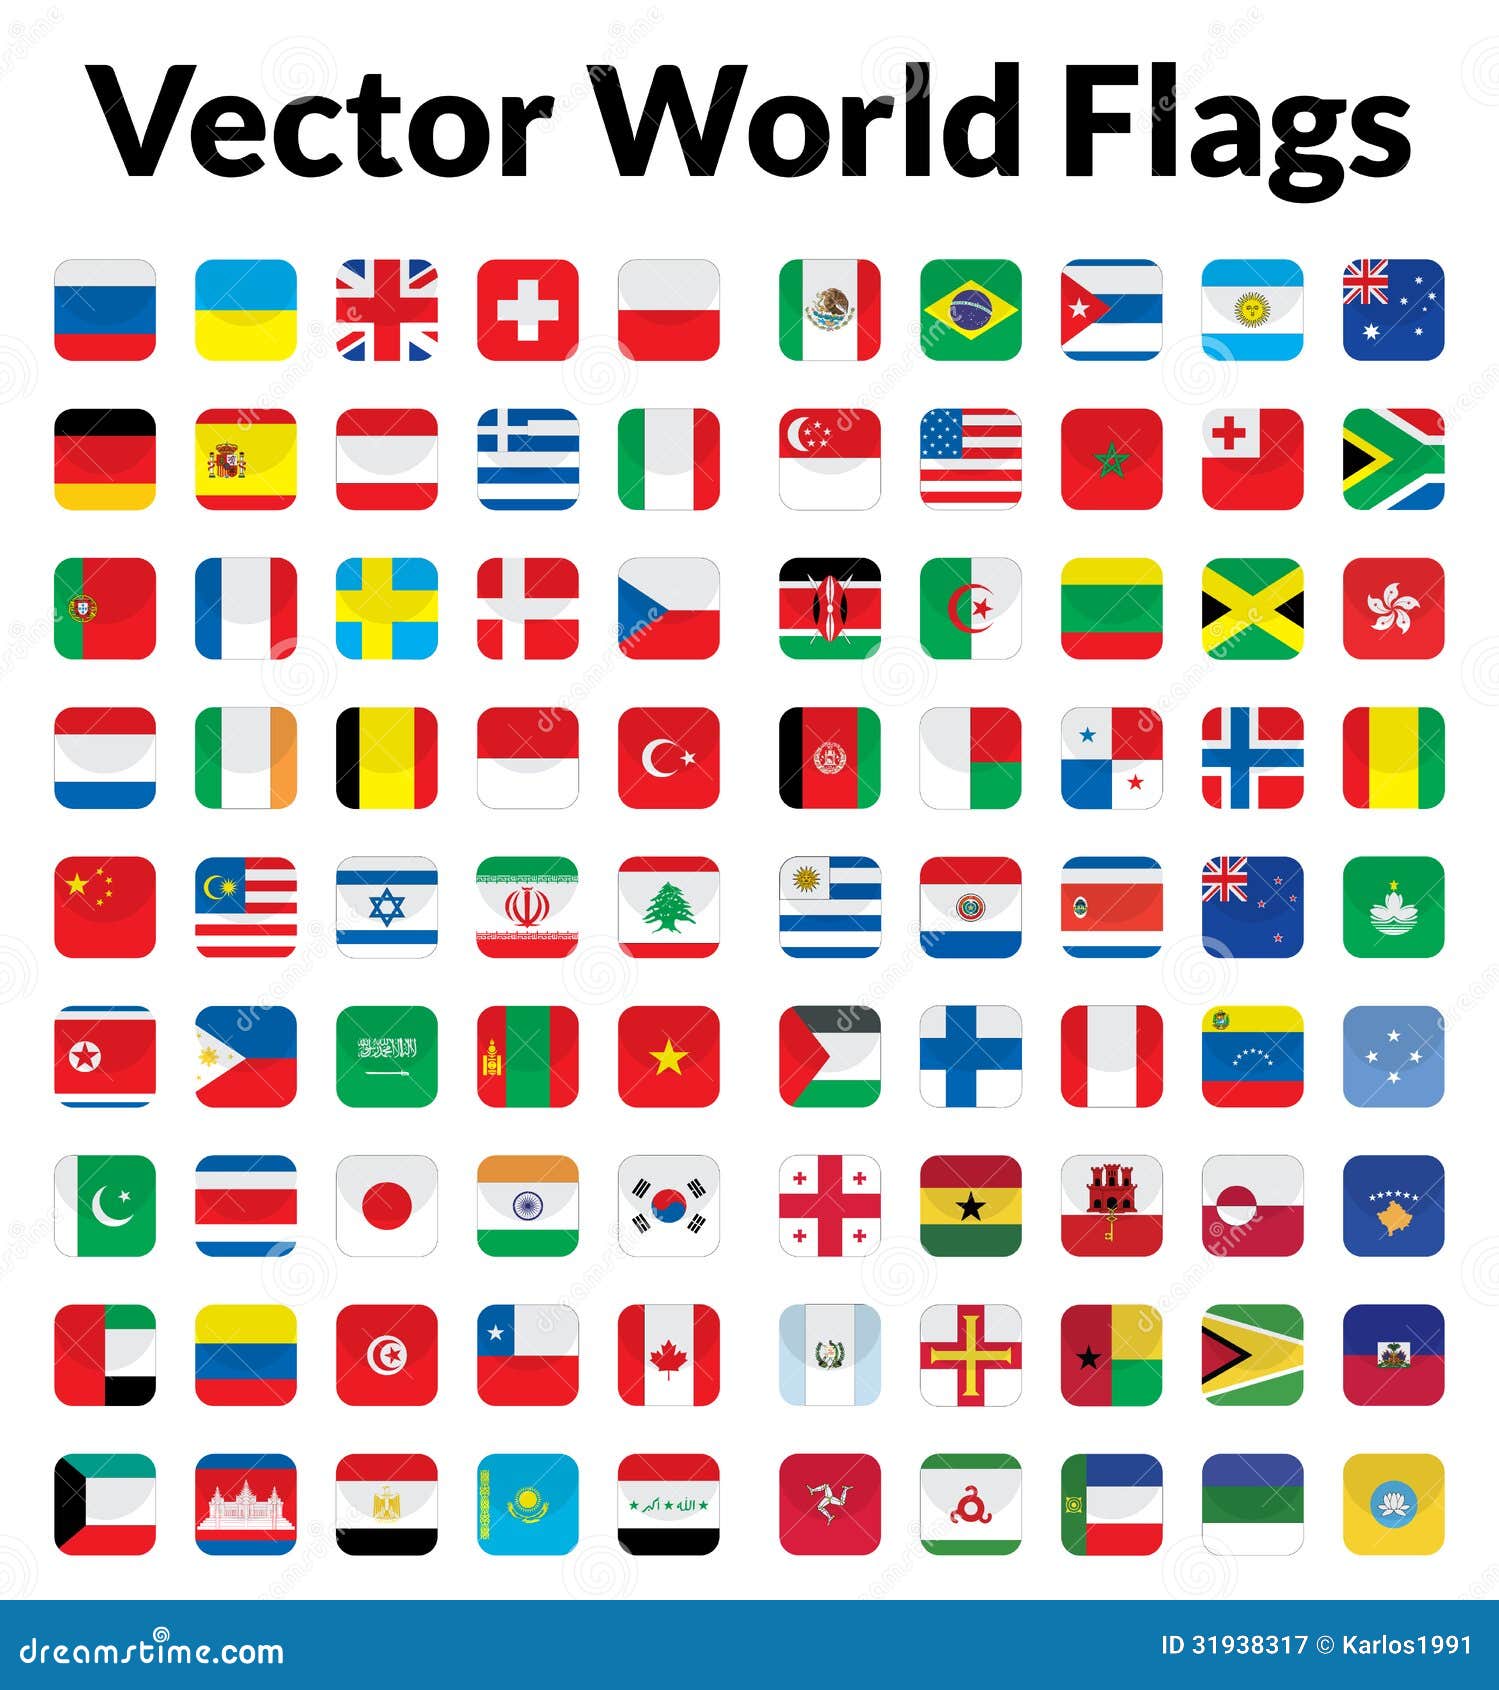 Download Vector World Flags stock vector. Illustration of nation ...